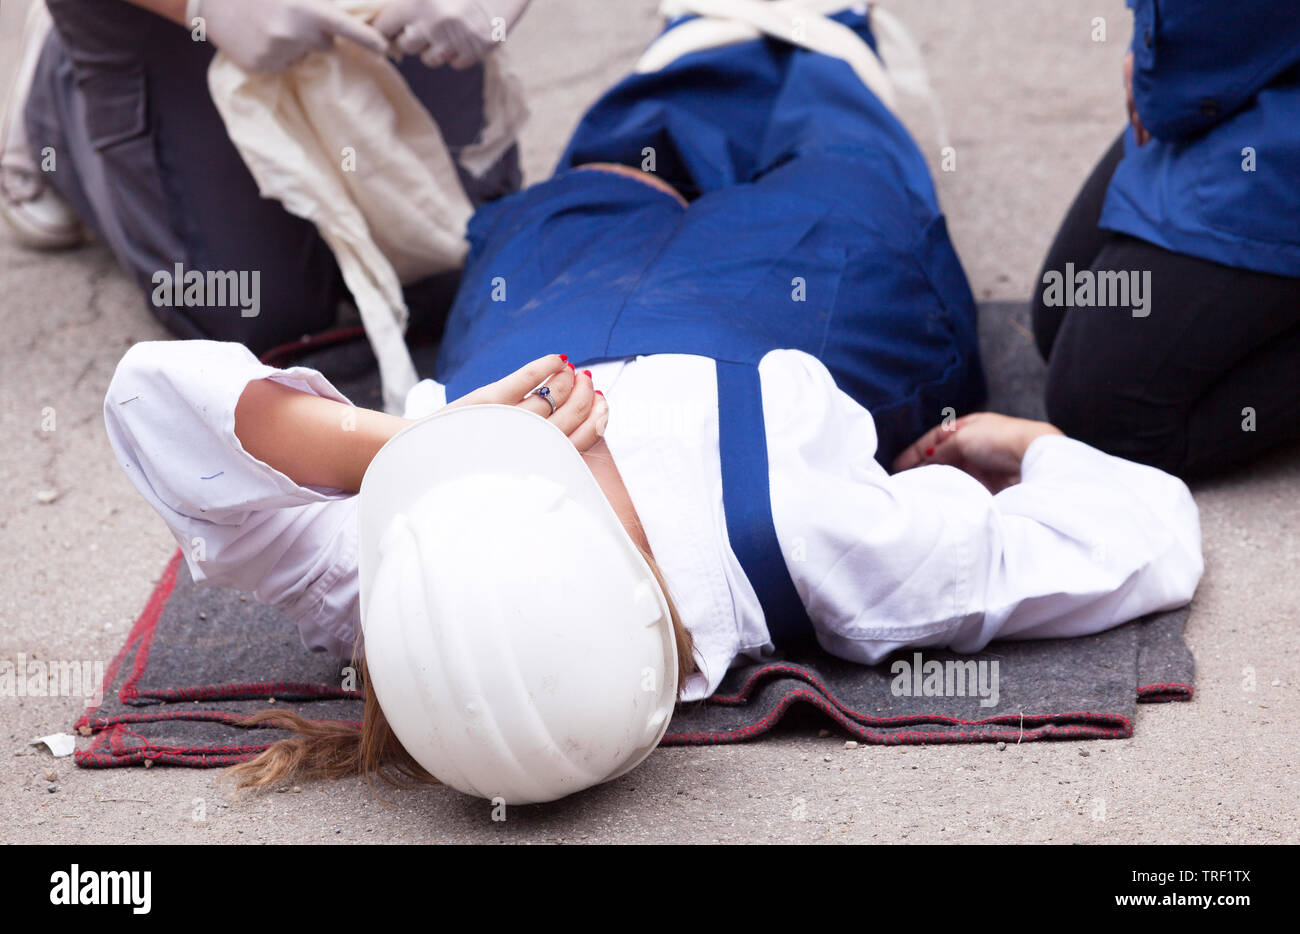 First aid training detail - helping an injured worker after a workplace accident Stock Photo